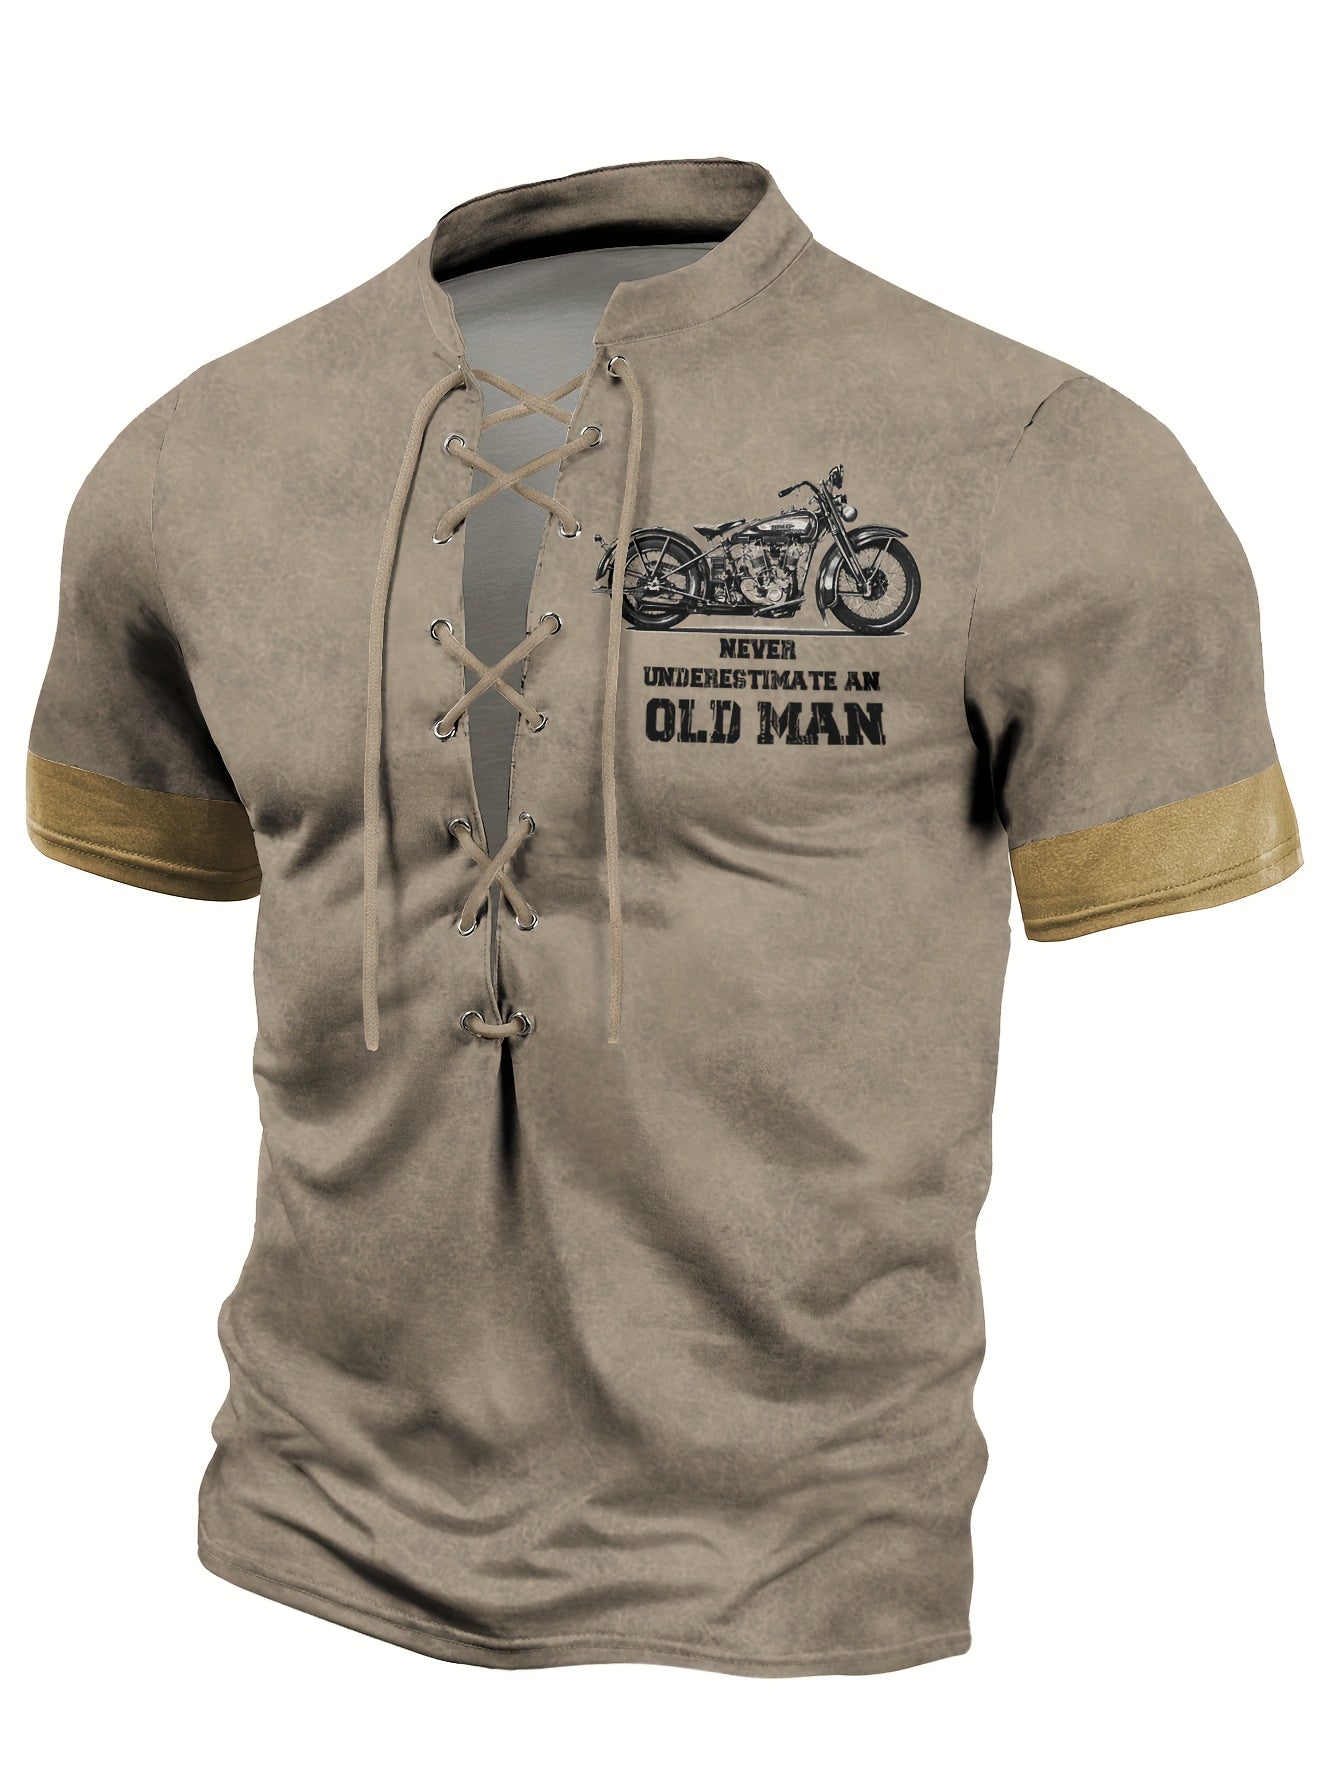 "Men's Motorcycle Print Lace-Up Henley Shirt - Casual and Stretchable Short Sleeve for Spring/Summer"